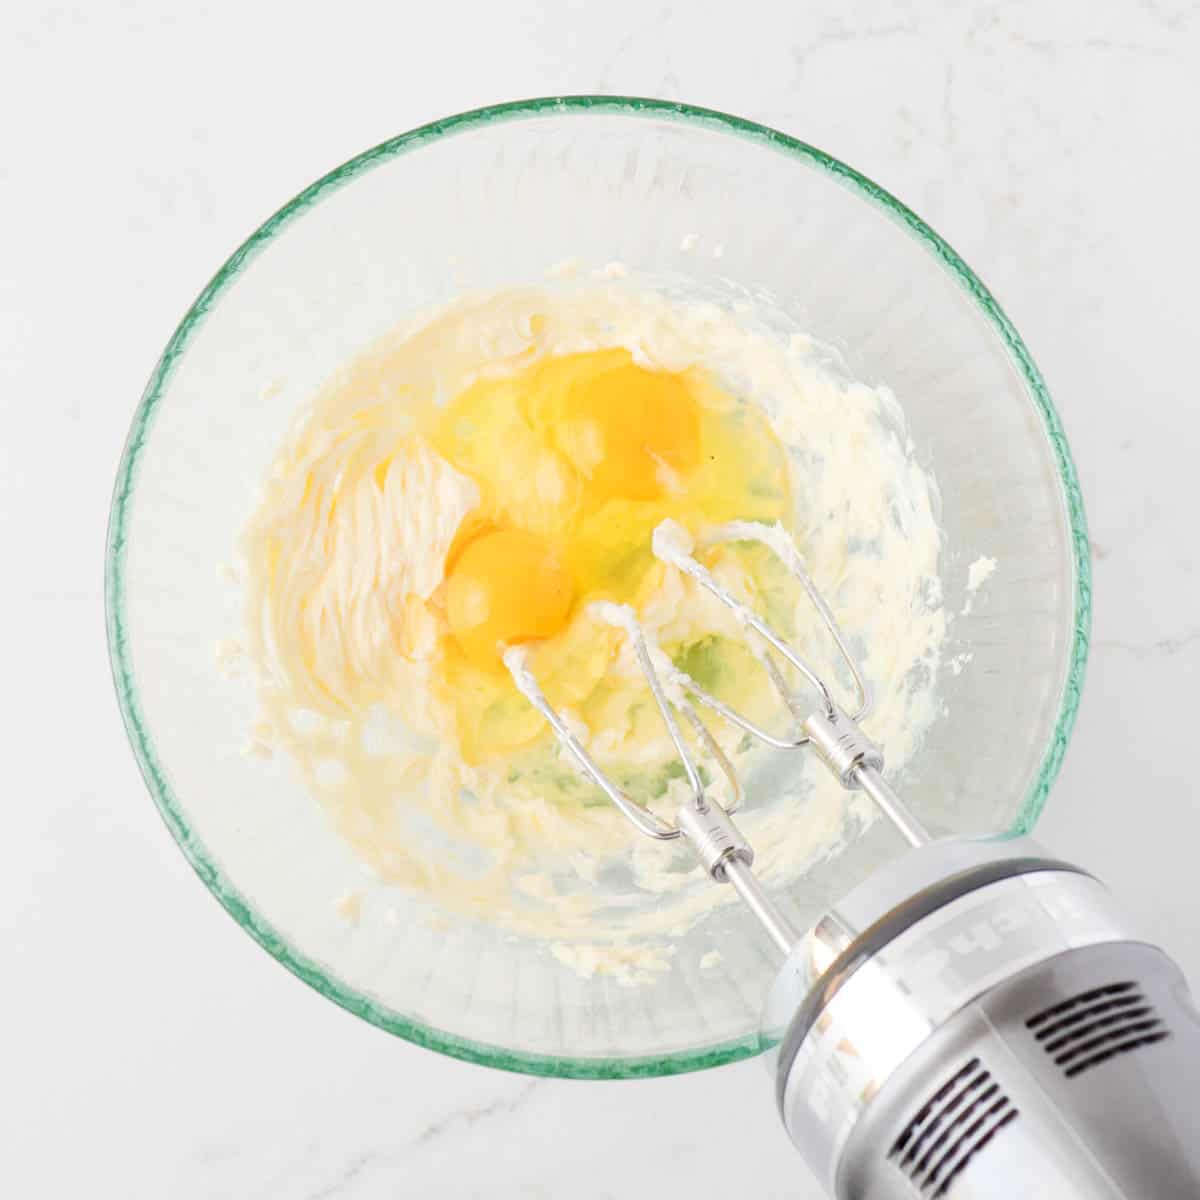 Creamed butter with eggs added in a mixing bowl.